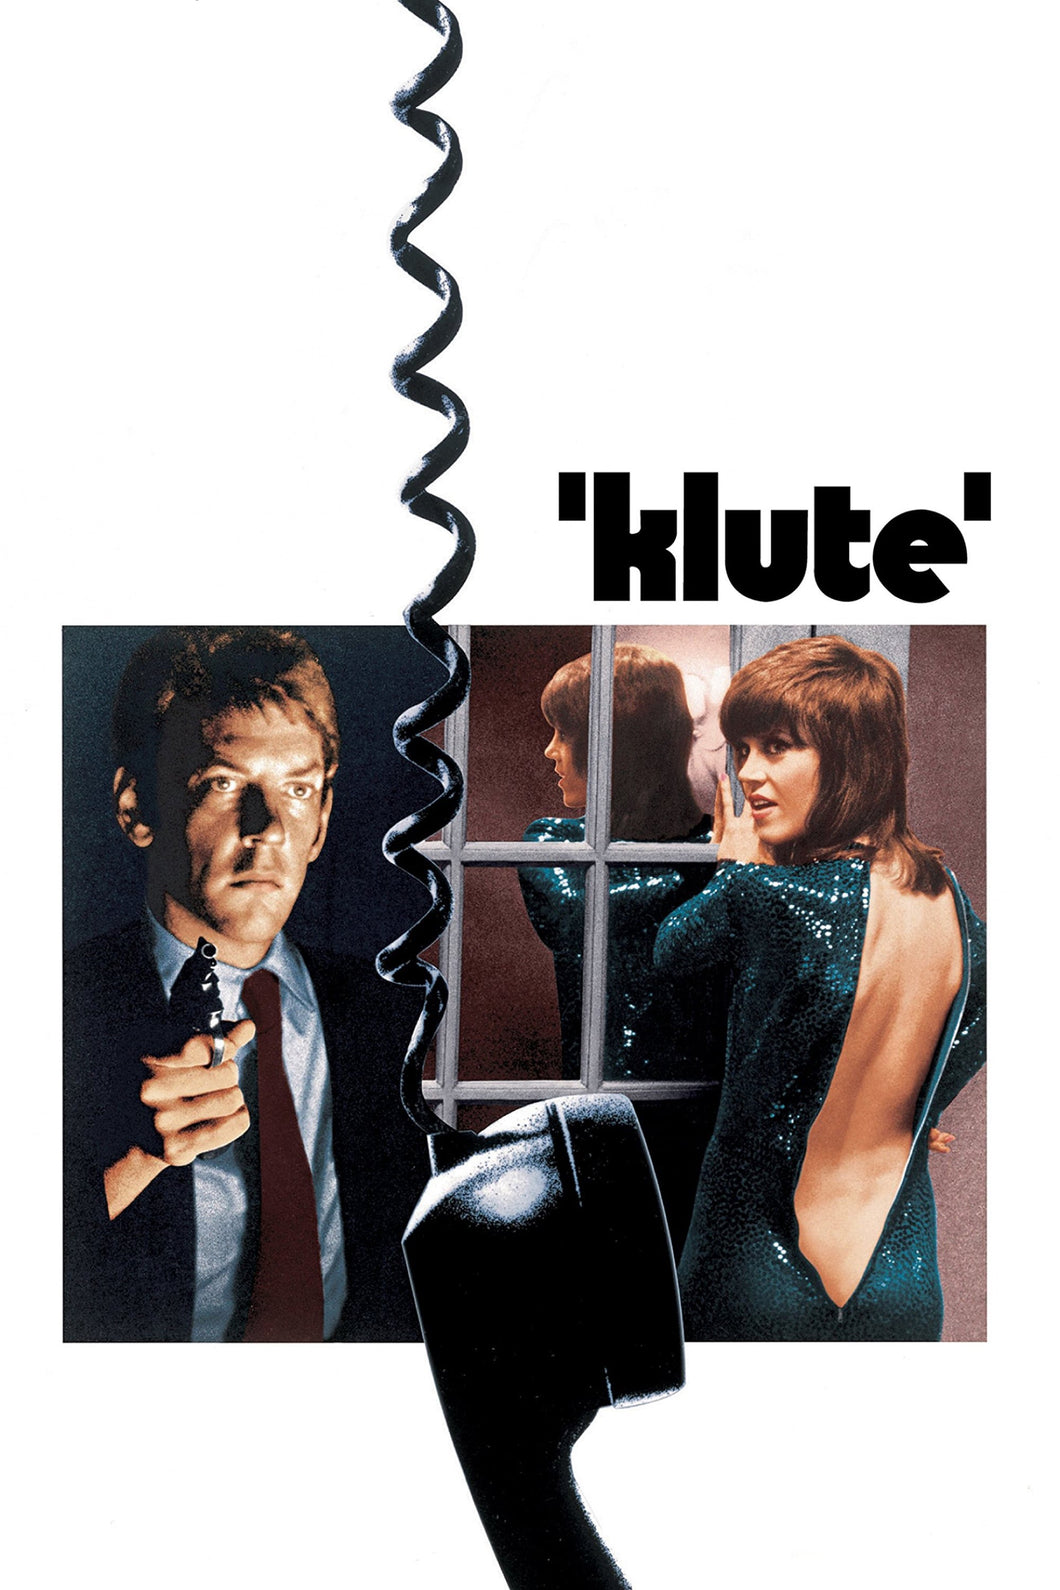 Klute (1971) Movie Poster High Quality Glossy Paper A1 A2 A3 A4 A3 Framed or Unframed!!!